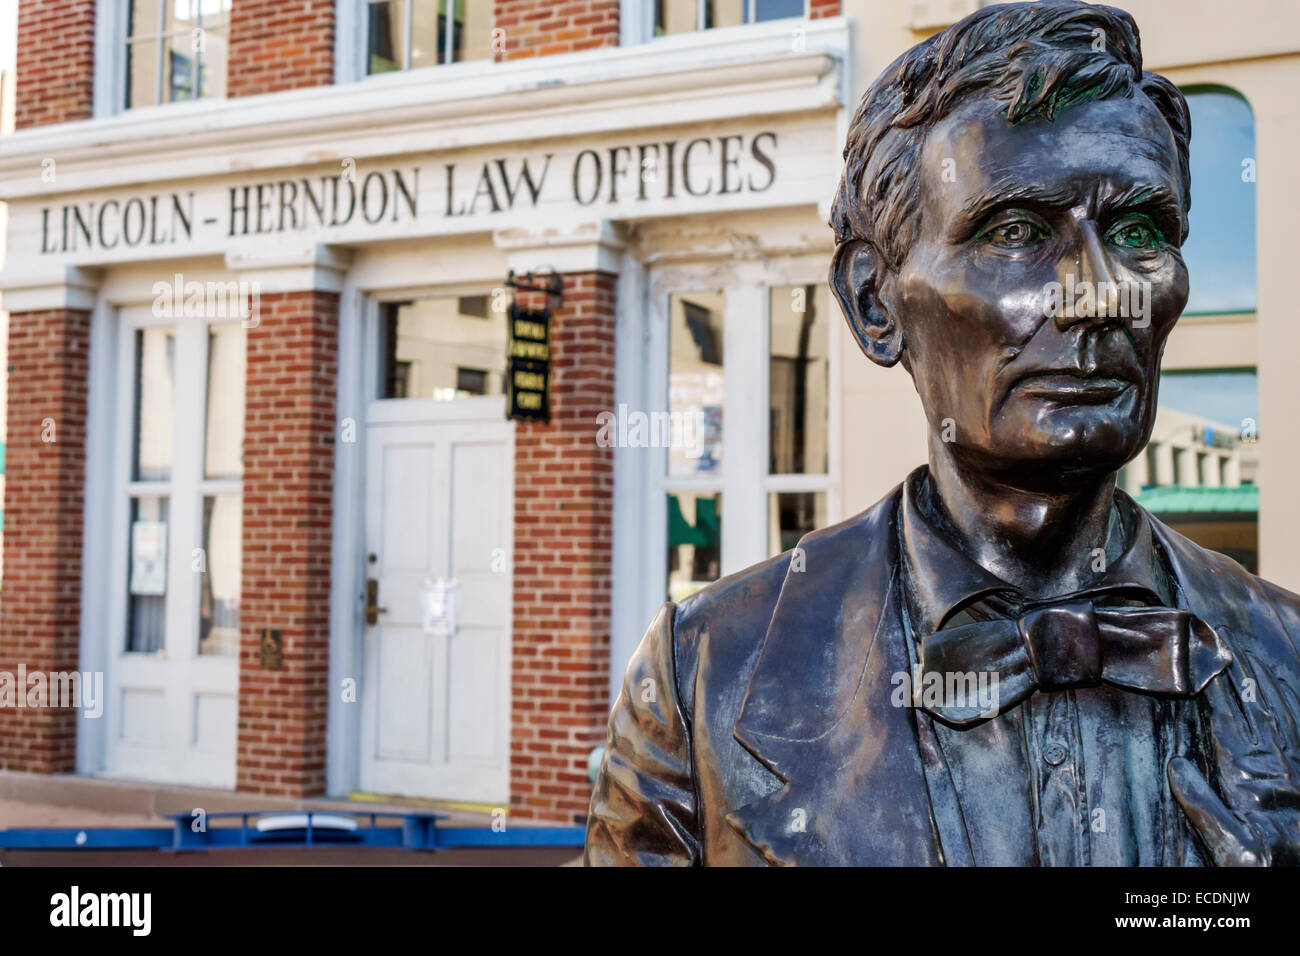 Springfield Illinois,downtown,buildings,Old State Capitol Plaza,Abraham Lincoln-Herndon Law Offices,statue,IL140903099 Stock Photo